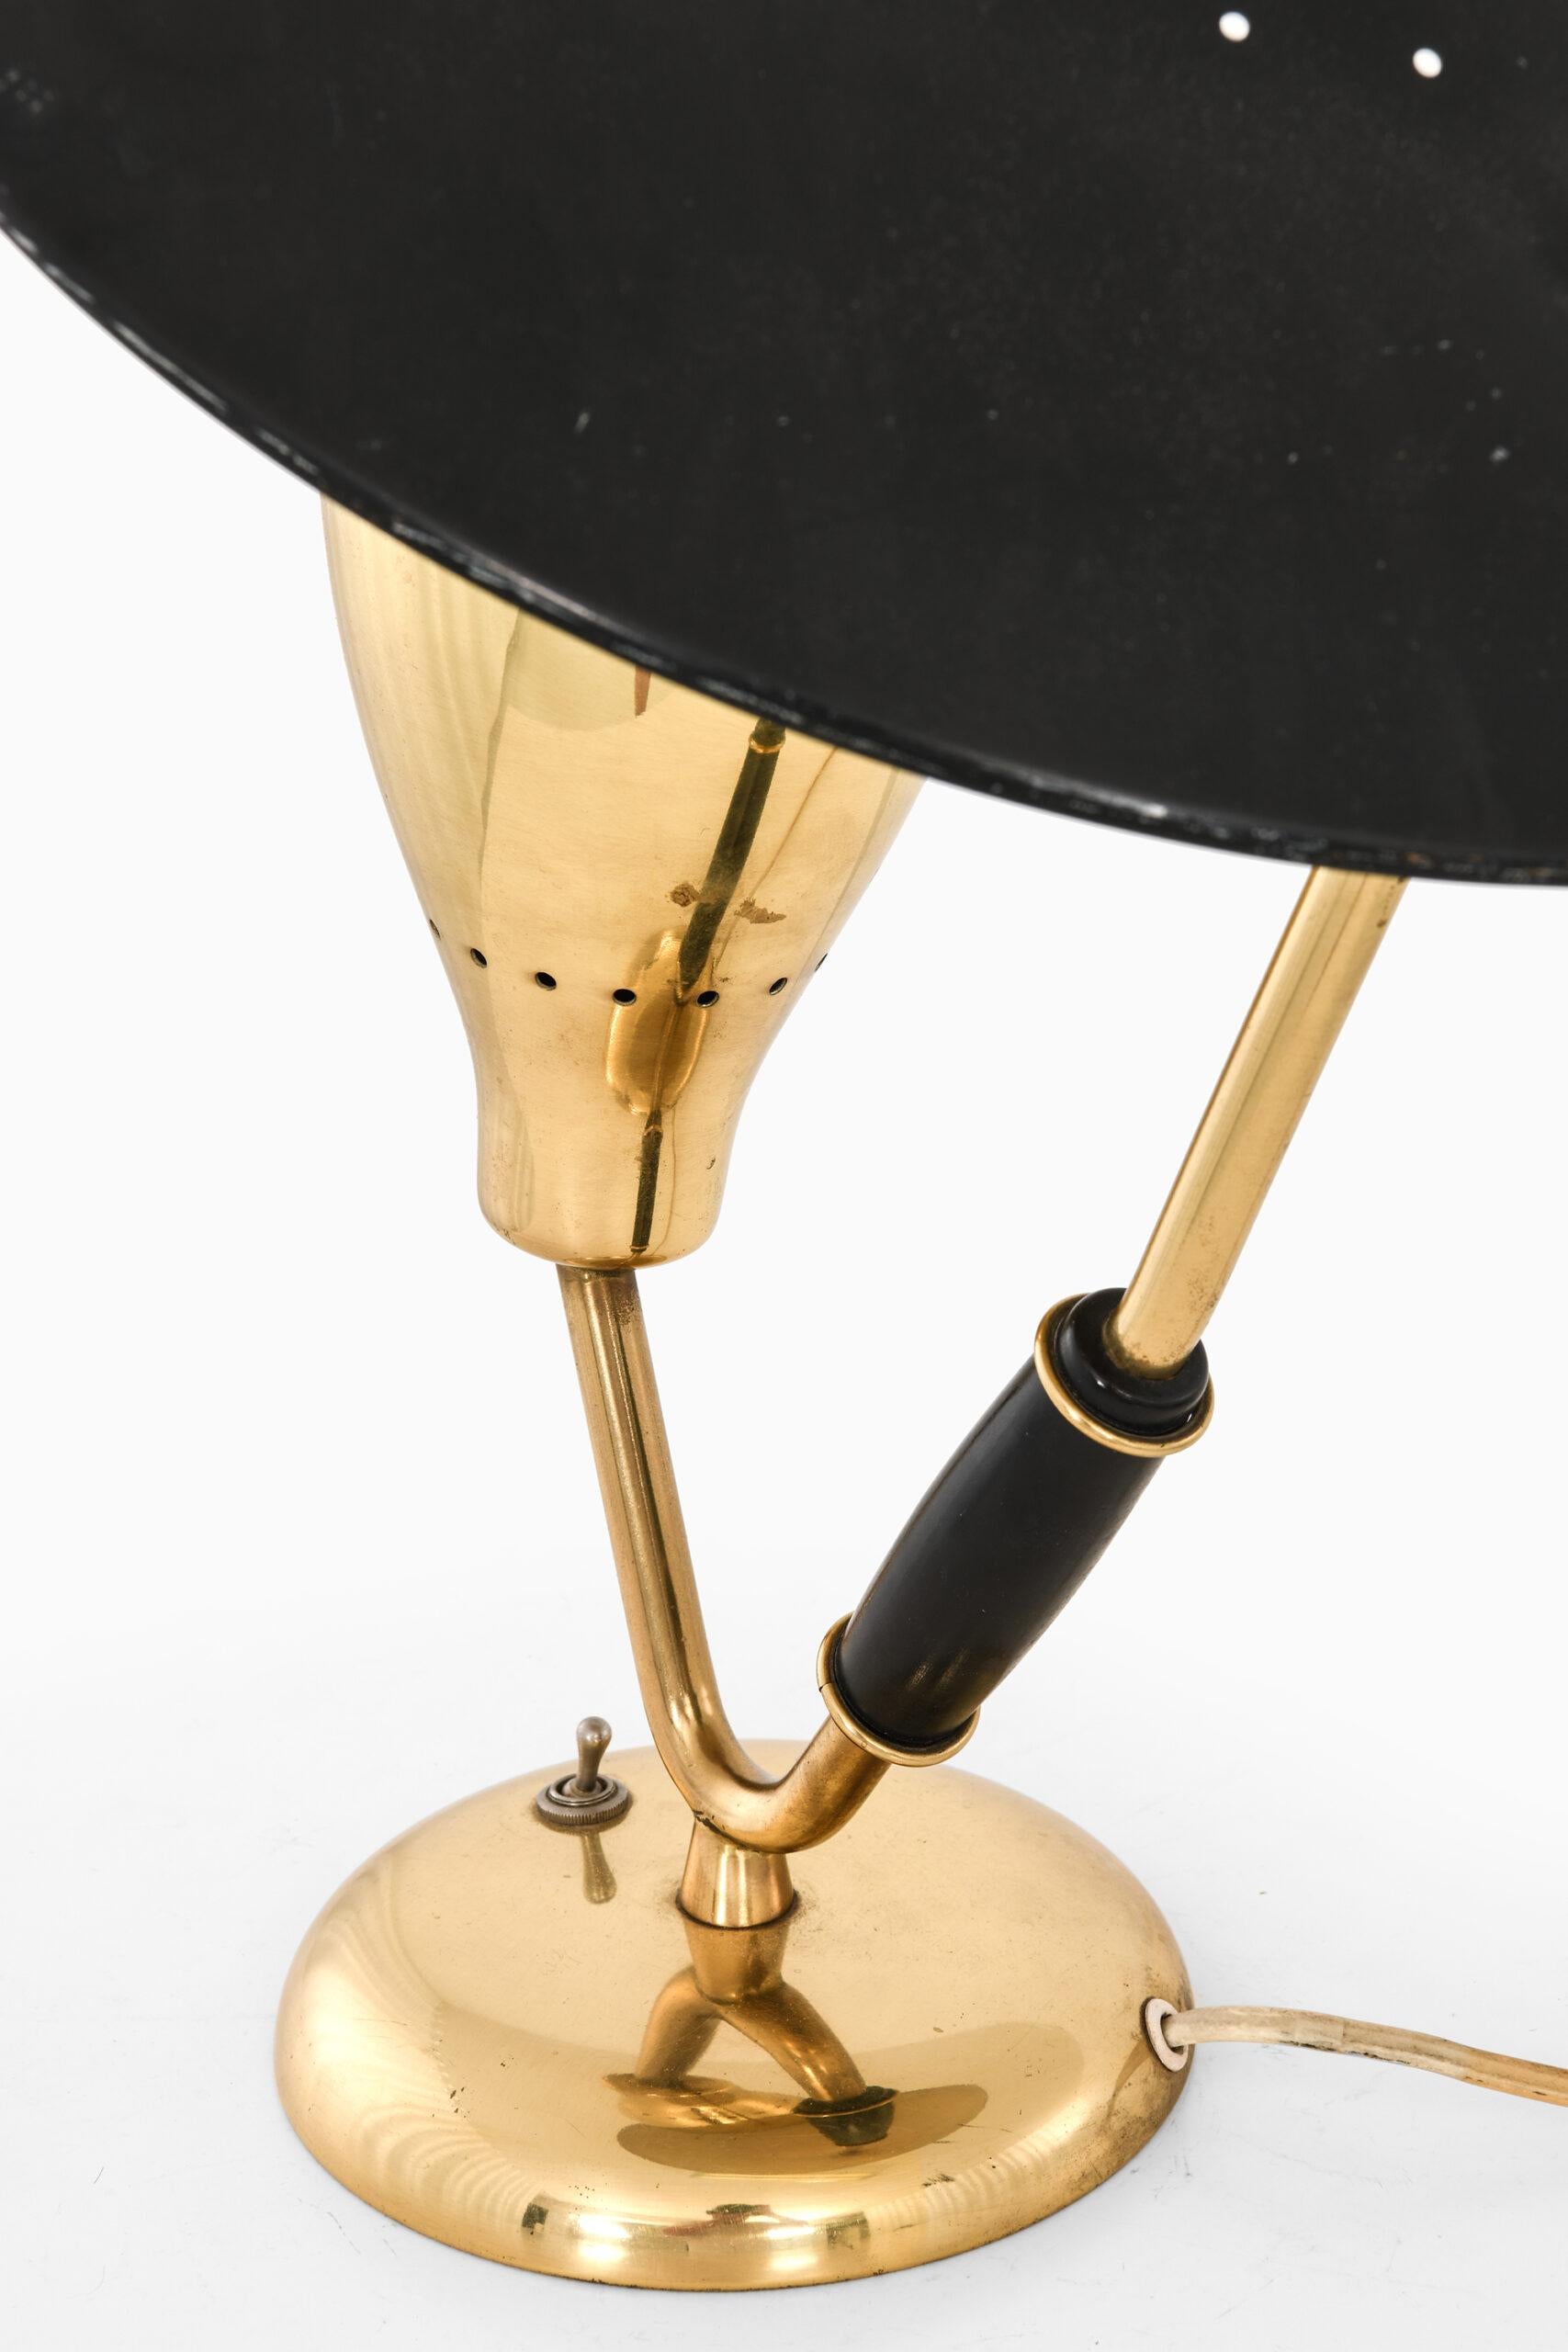 Scandinavian Modern Table Lamp Attributed to Svend Aage Holm Sørensen Produced by Boréns For Sale